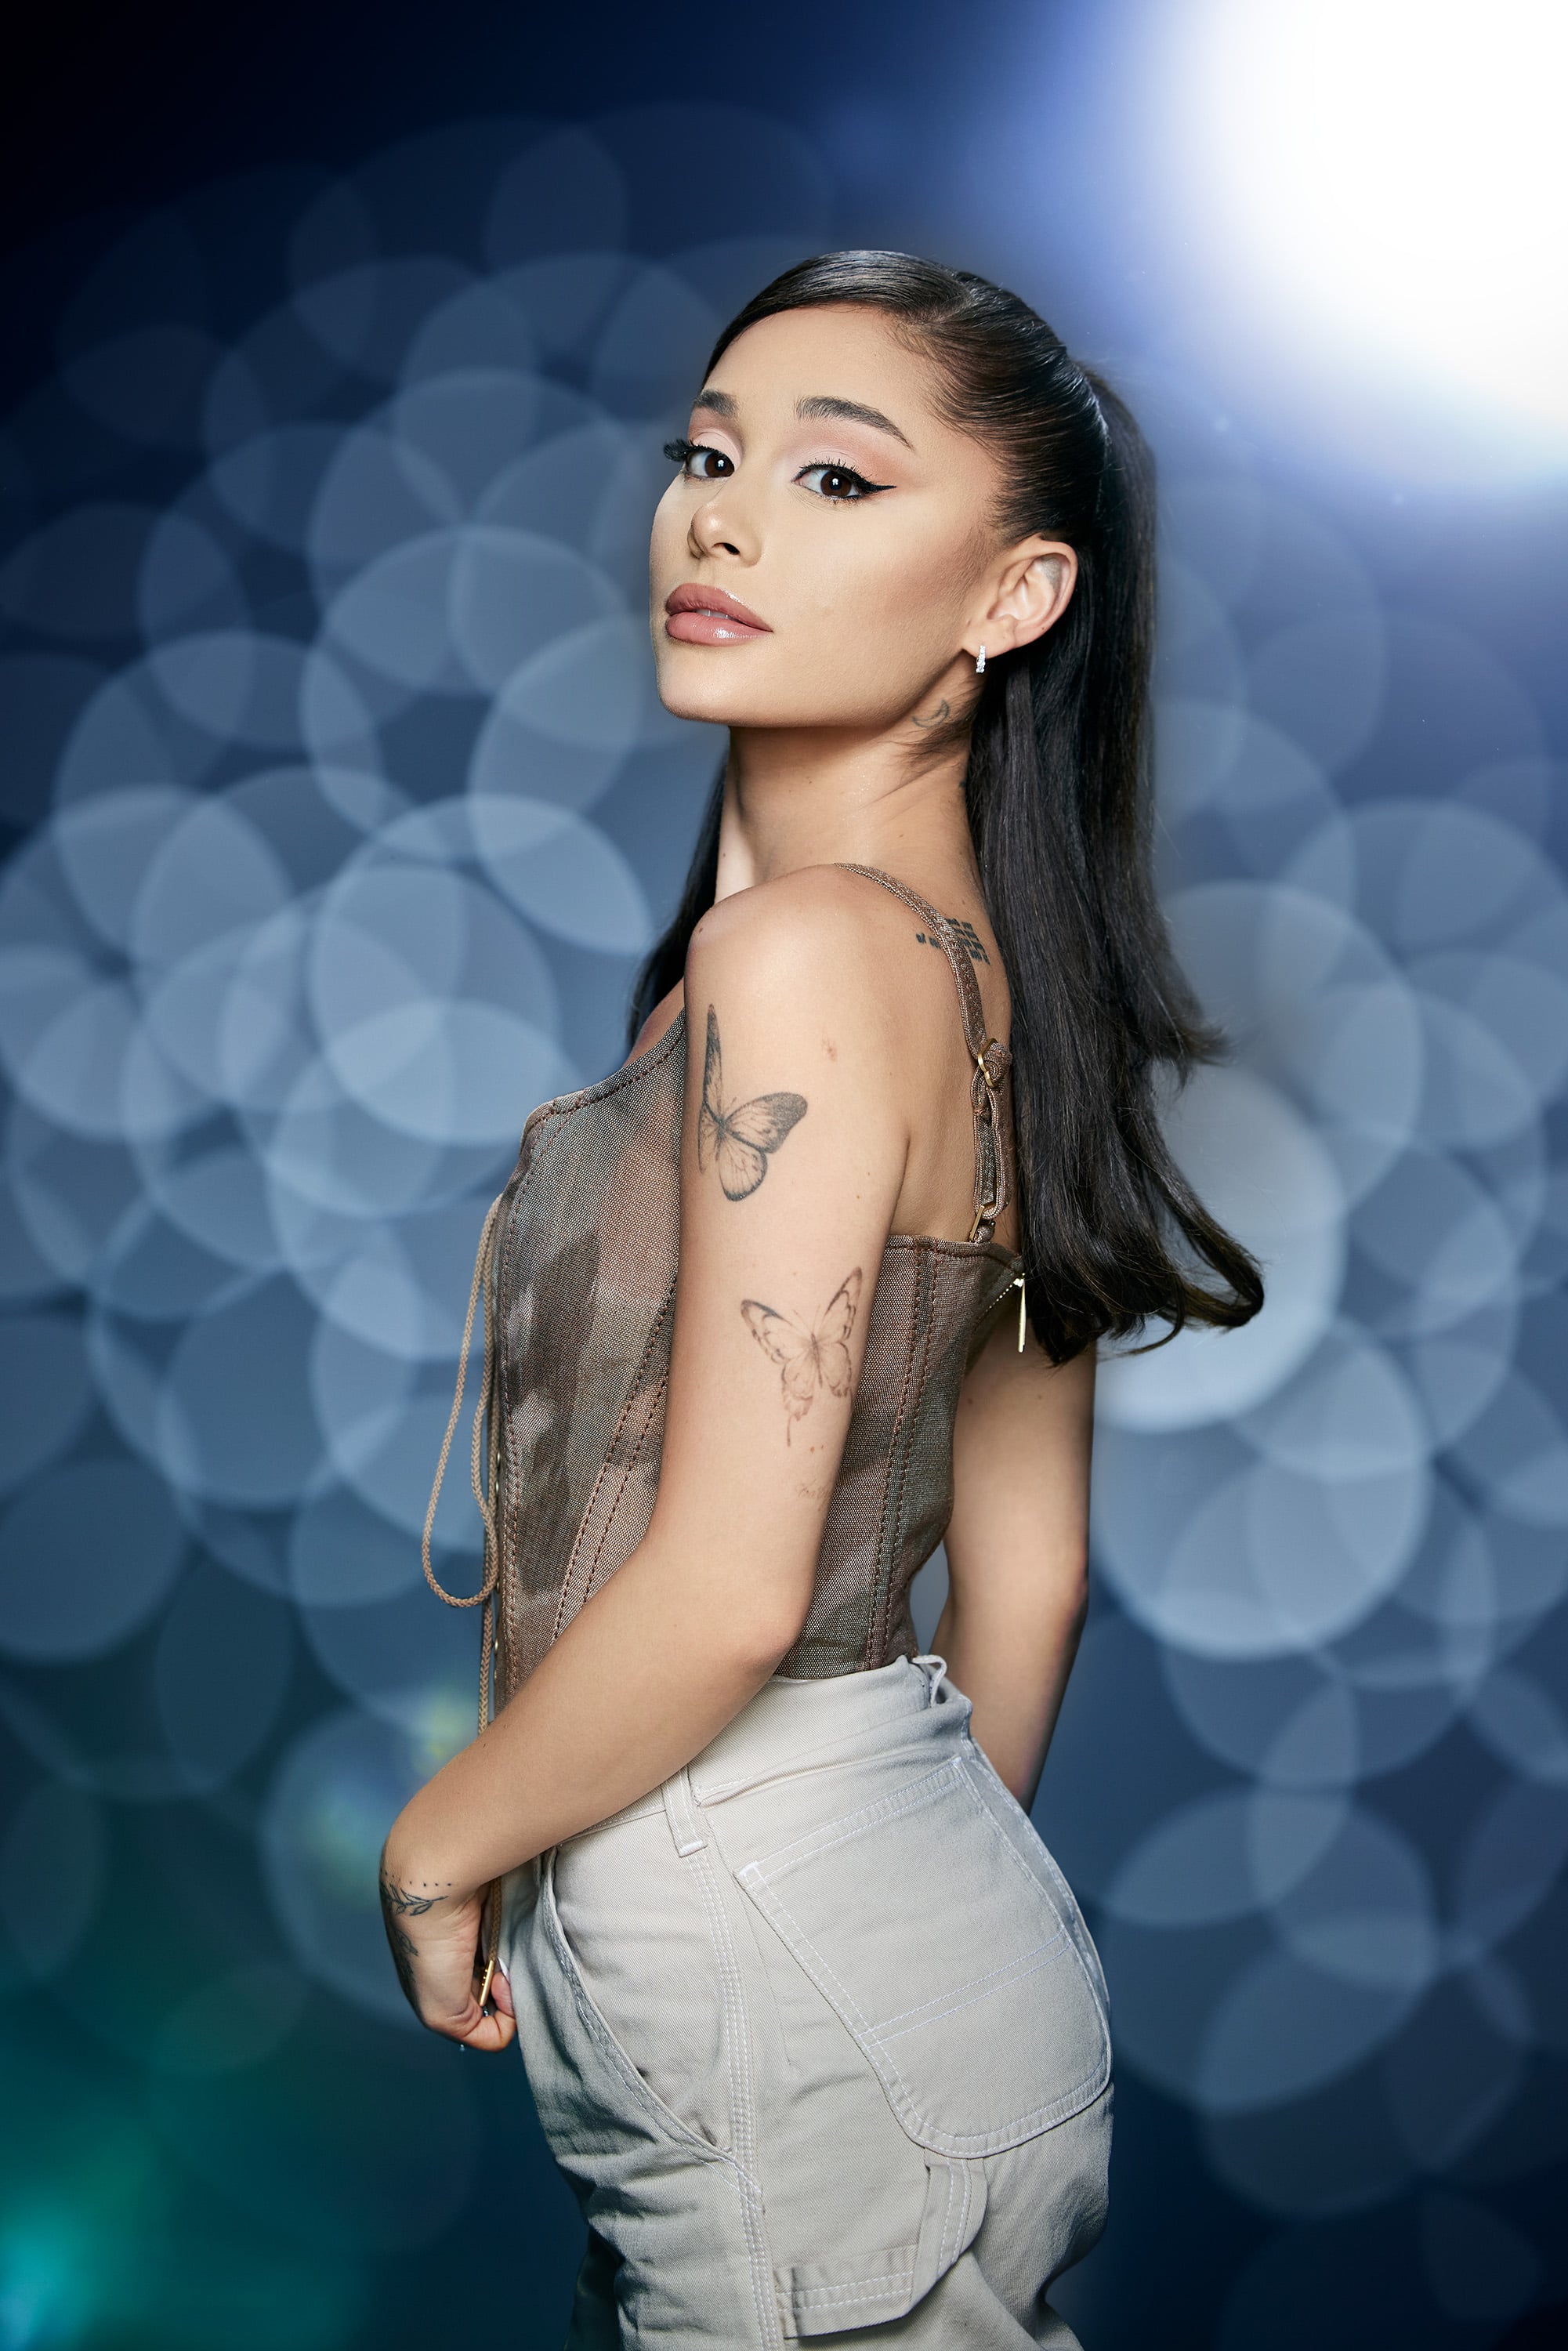 THE VOICE -- Season: 21 -- Pictured: Ariana Grande -- (Photo by: Art Streiber/NBC/NBCU Photo Bank via Getty Images)